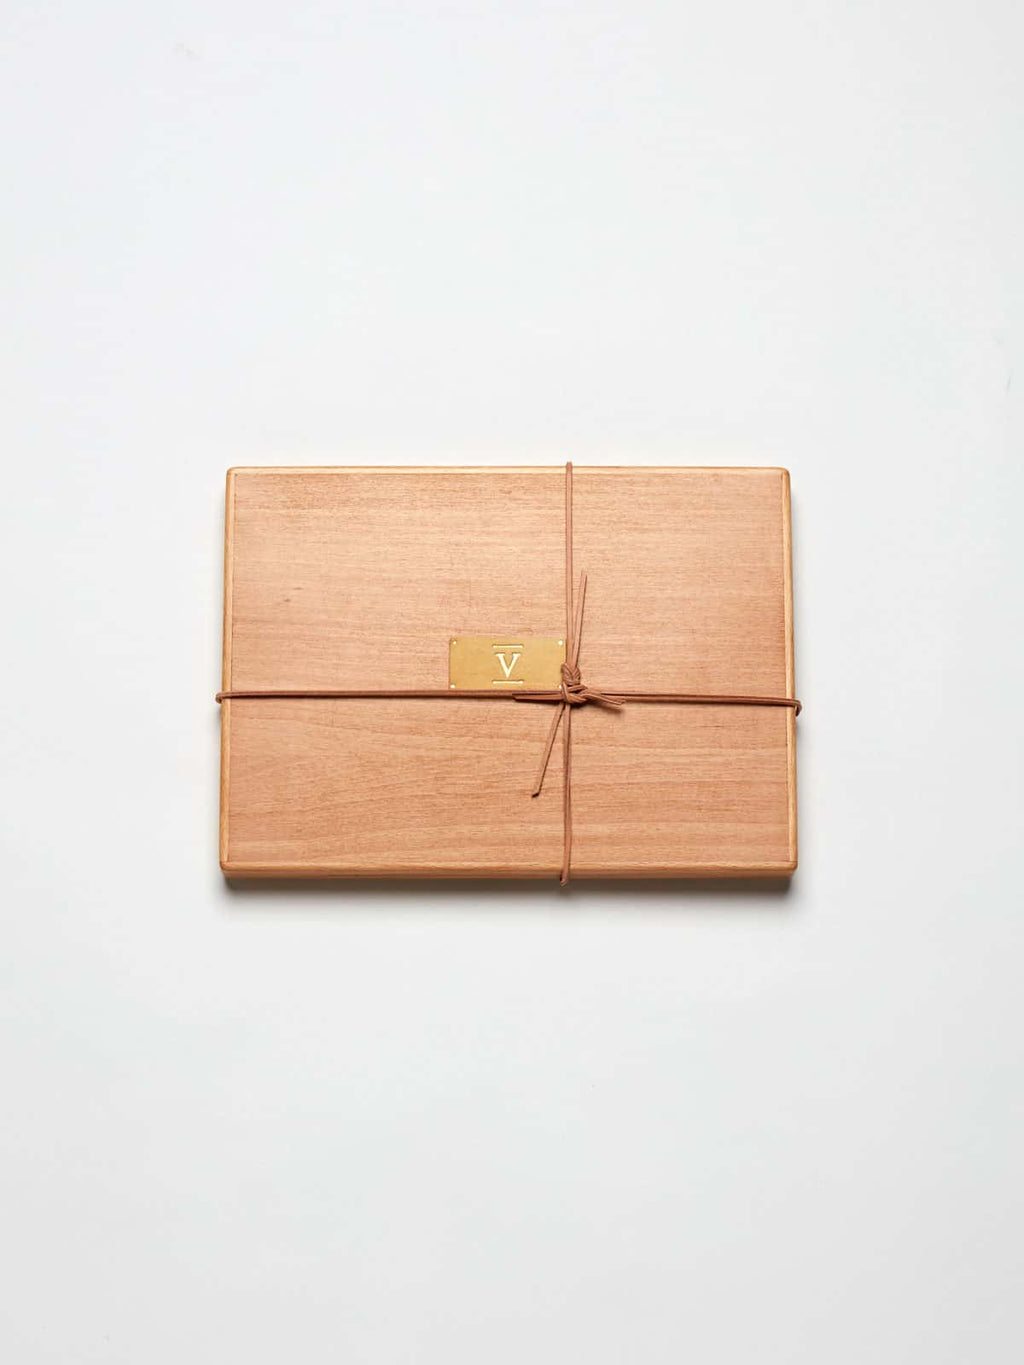 wooden box for gift Certificate